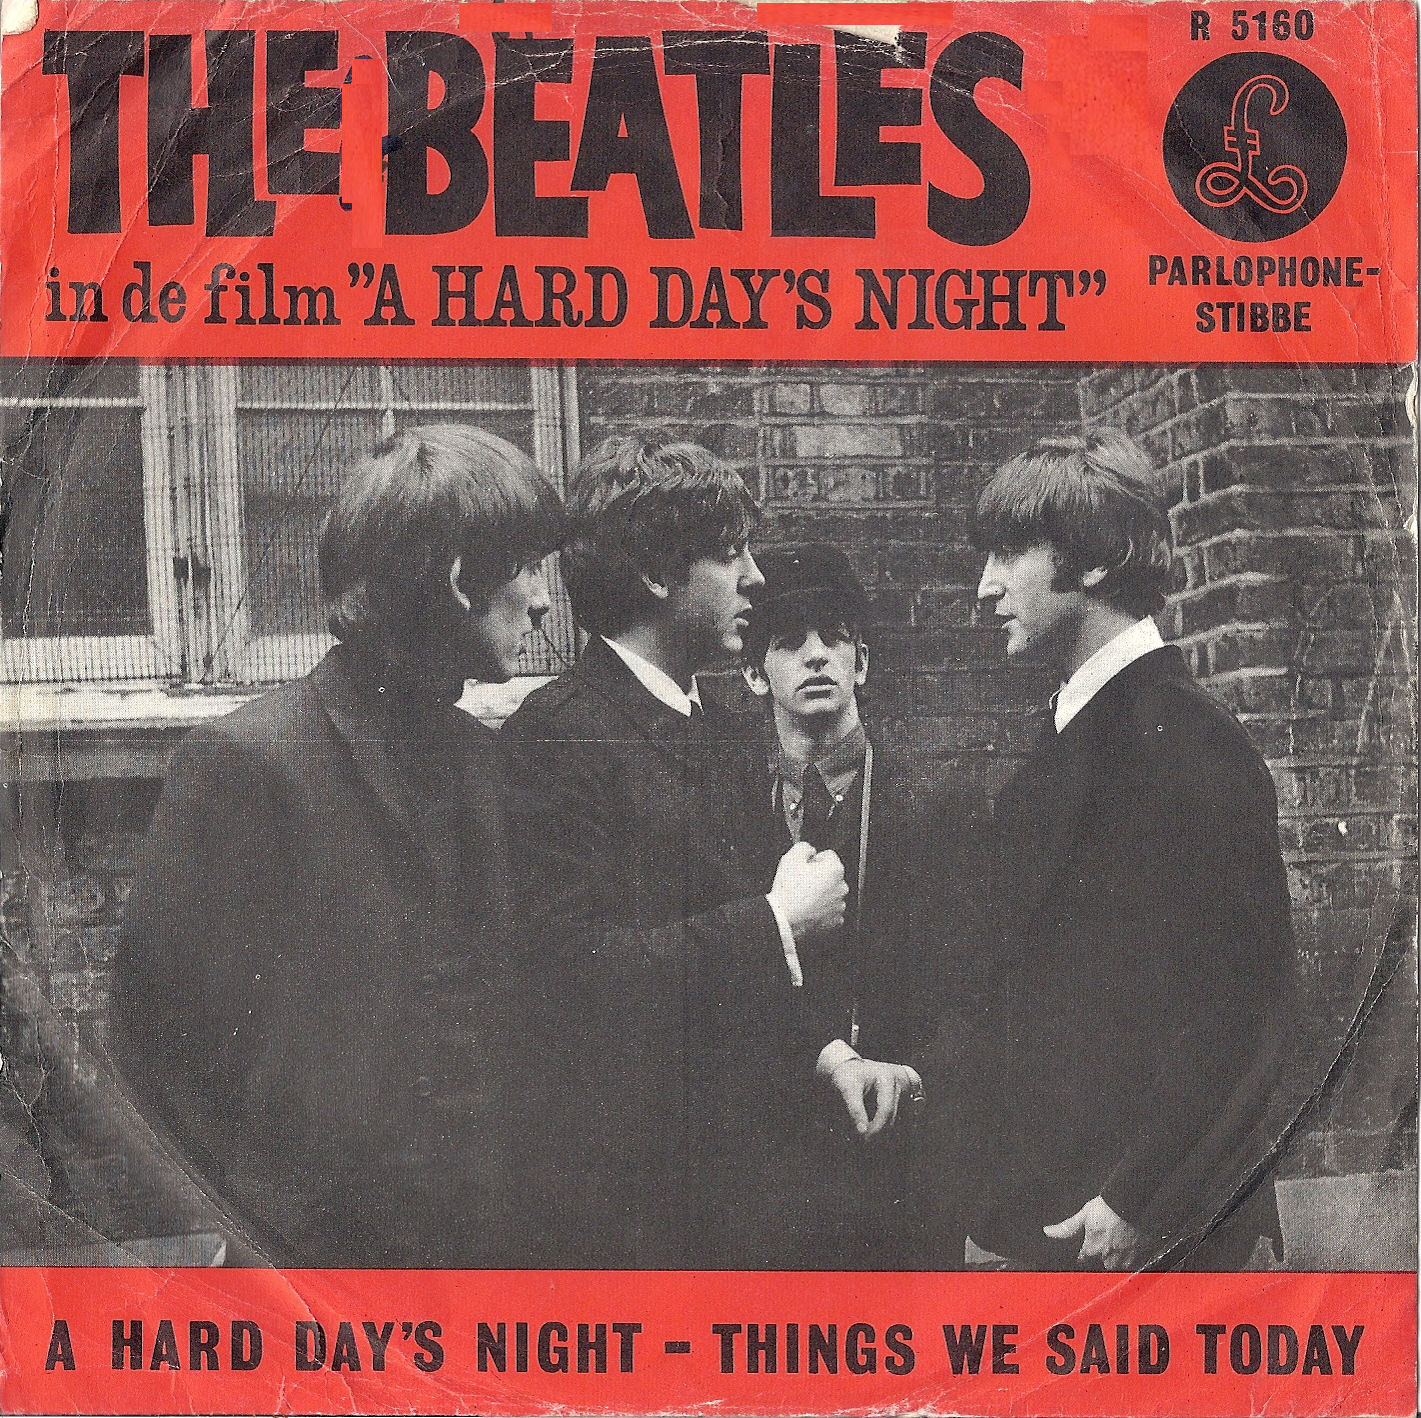 The beatles a hard day s night. The Beatles a hard Day's Night 1964. The Beatles a hard Day's Night обложка. Битлз hard Days Night альбом. The Beatles a hard Day's Night 1964 альбом.